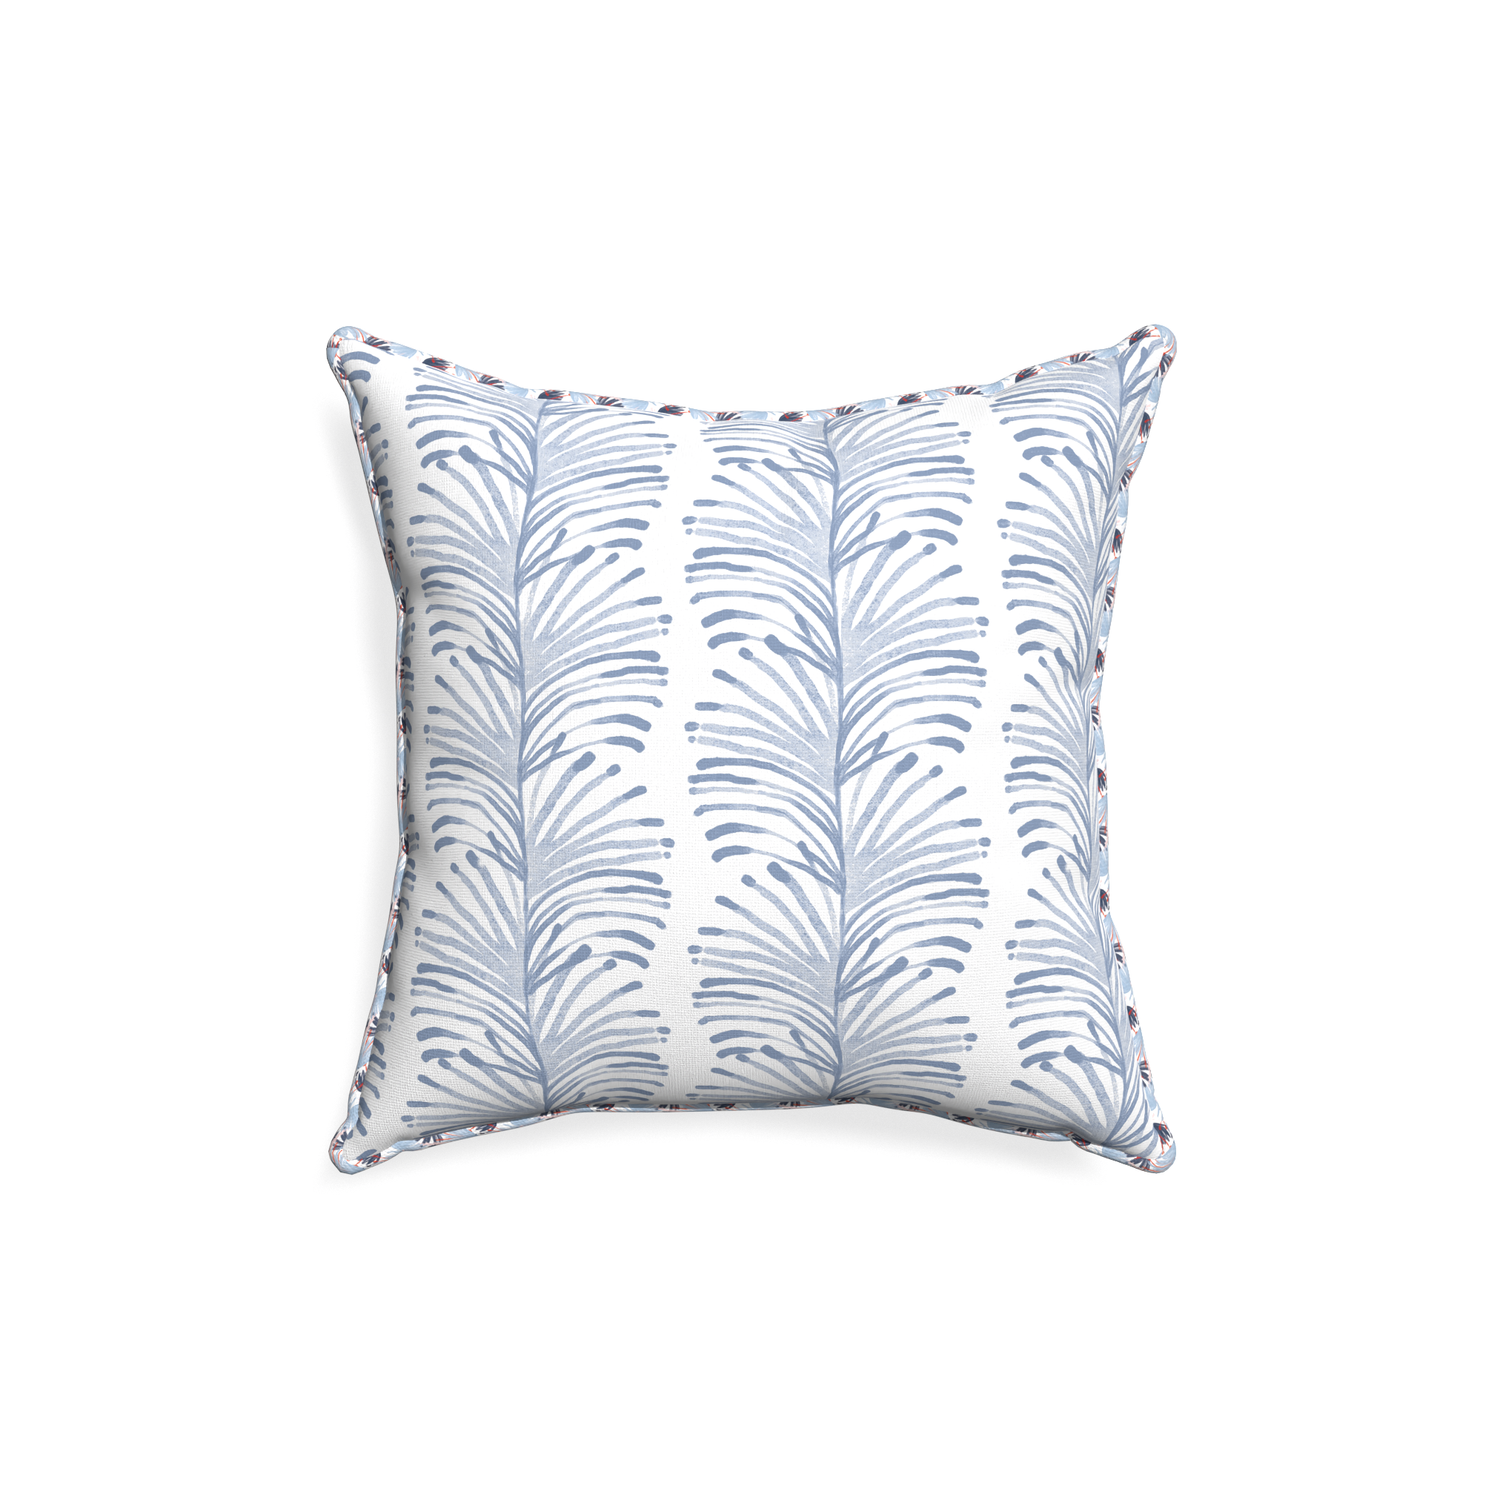 18-square emma sky custom sky blue botanical stripepillow with e piping on white background